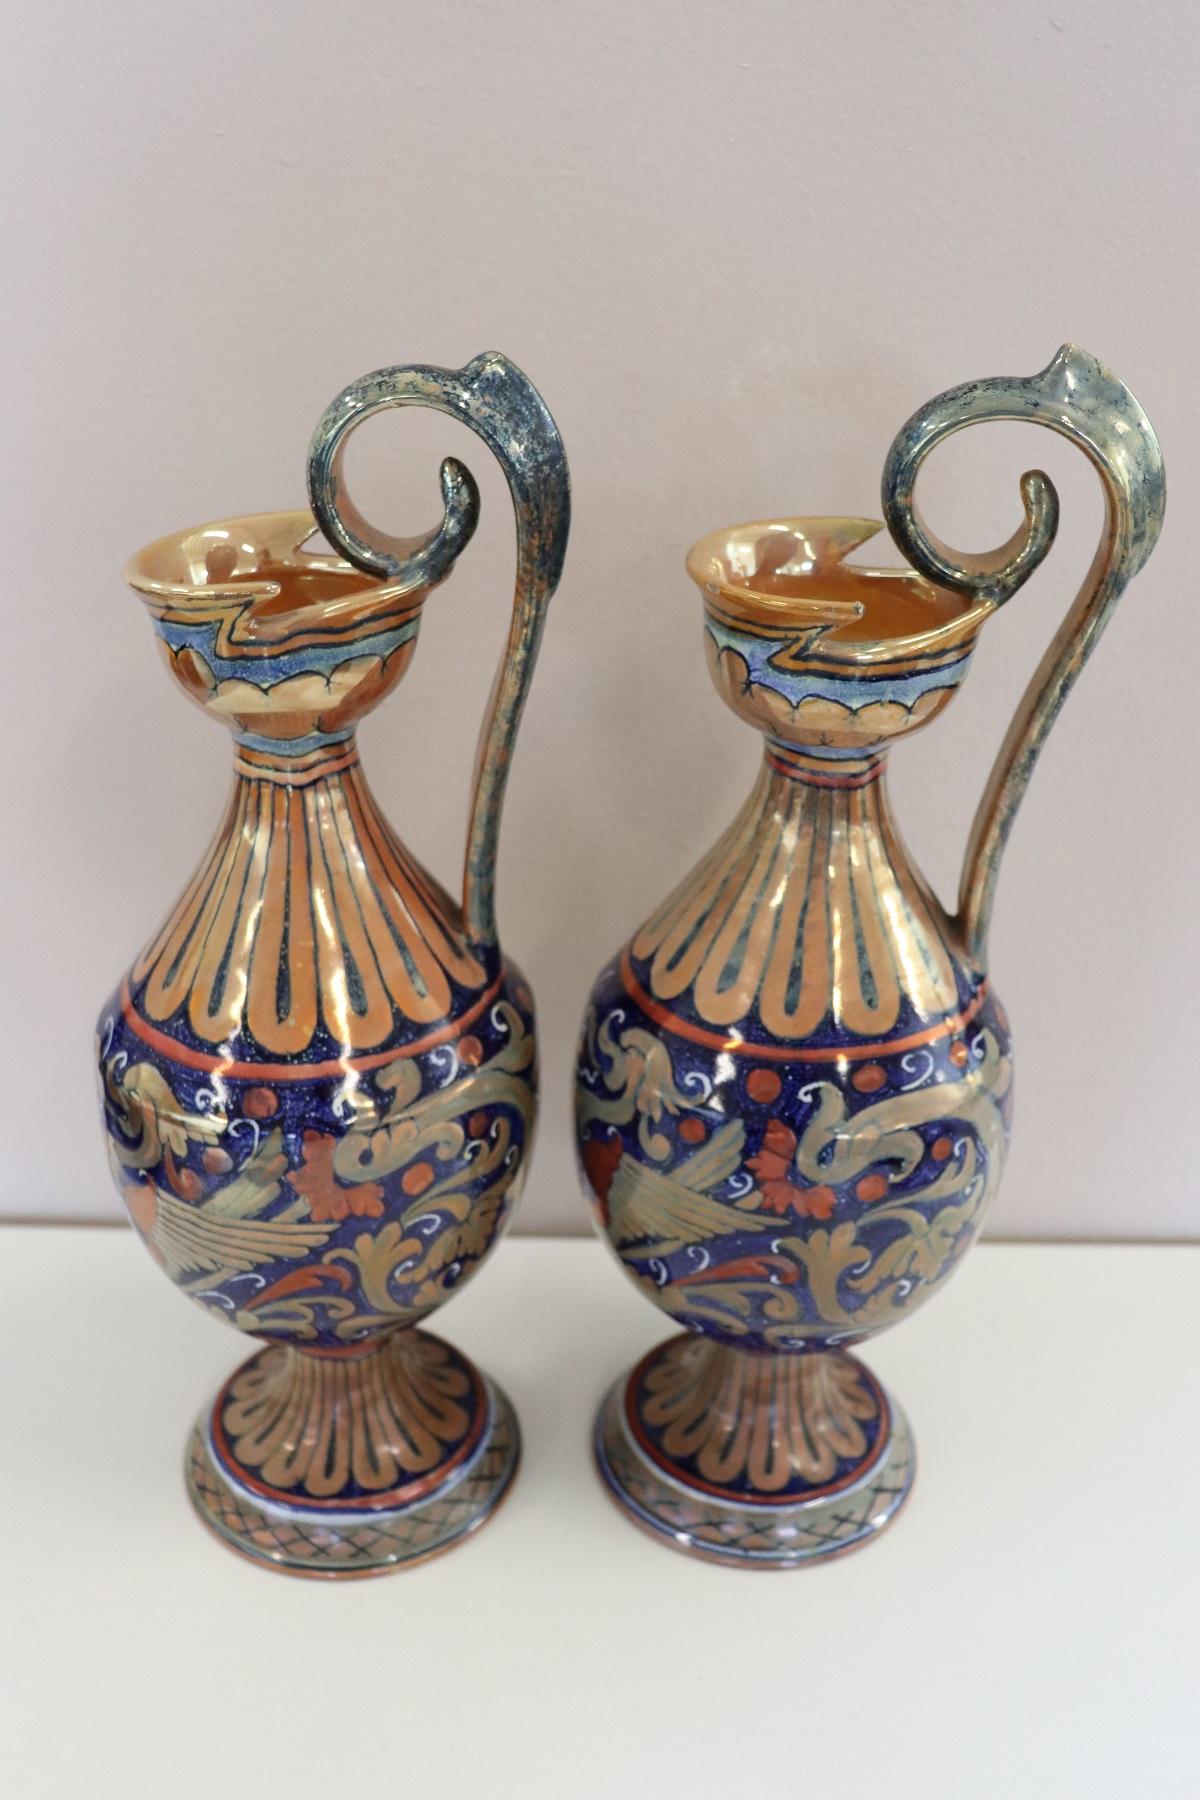 Pair of Majolica Vases with Blue Decorations by Gualdo Tadino, 1920s 1